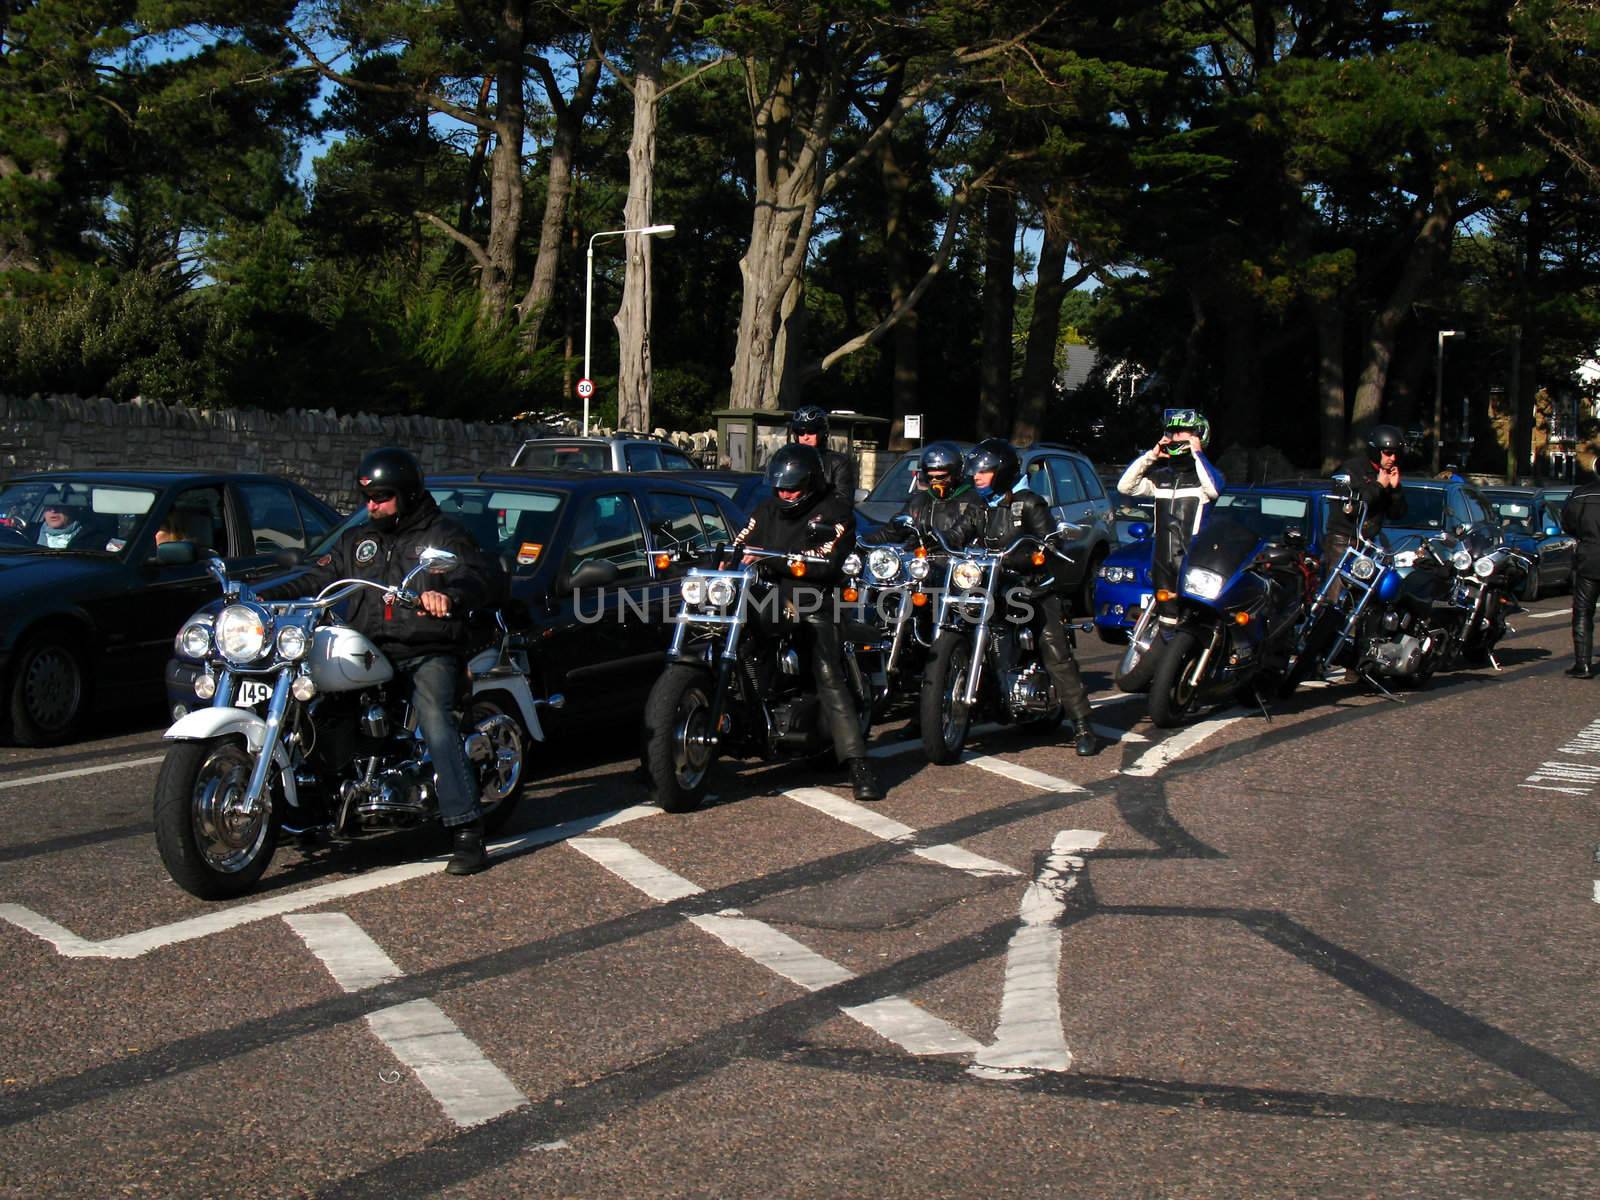 Bikers queuing for the Sandbanks Ferry by tommroch